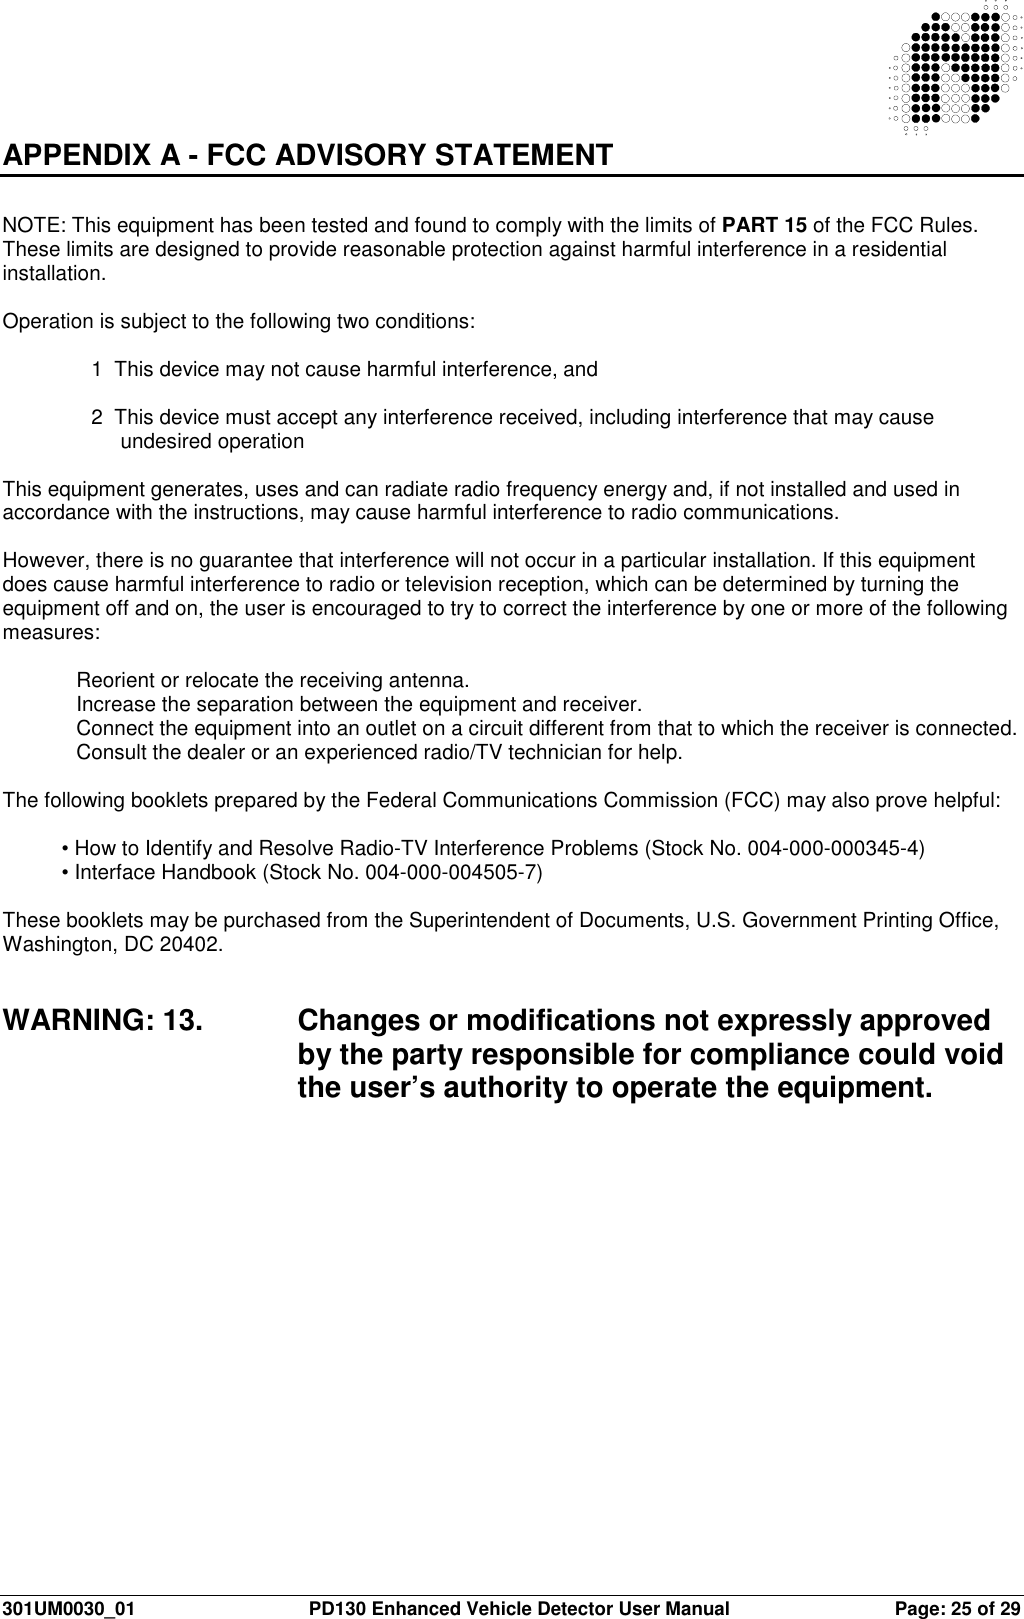  301UM0030_01  PD130 Enhanced Vehicle Detector User Manual  Page: 25 of 29    APPENDIX A - FCC ADVISORY STATEMENT   NOTE: This equipment has been tested and found to comply with the limits of PART 15 of the FCC Rules. These limits are designed to provide reasonable protection against harmful interference in a residential installation.   Operation is subject to the following two conditions:   1  This device may not cause harmful interference, and  2  This device must accept any interference received, including interference that may cause undesired operation  This equipment generates, uses and can radiate radio frequency energy and, if not installed and used in accordance with the instructions, may cause harmful interference to radio communications.   However, there is no guarantee that interference will not occur in a particular installation. If this equipment does cause harmful interference to radio or television reception, which can be determined by turning the equipment off and on, the user is encouraged to try to correct the interference by one or more of the following measures:   Reorient or relocate the receiving antenna. Increase the separation between the equipment and receiver.  Connect the equipment into an outlet on a circuit different from that to which the receiver is connected.  Consult the dealer or an experienced radio/TV technician for help.  The following booklets prepared by the Federal Communications Commission (FCC) may also prove helpful:  • How to Identify and Resolve Radio-TV Interference Problems (Stock No. 004-000-000345-4) • Interface Handbook (Stock No. 004-000-004505-7)  These booklets may be purchased from the Superintendent of Documents, U.S. Government Printing Office, Washington, DC 20402.   WARNING: 13.  Changes or modifications not expressly approved by the party responsible for compliance could void the user’s authority to operate the equipment.    